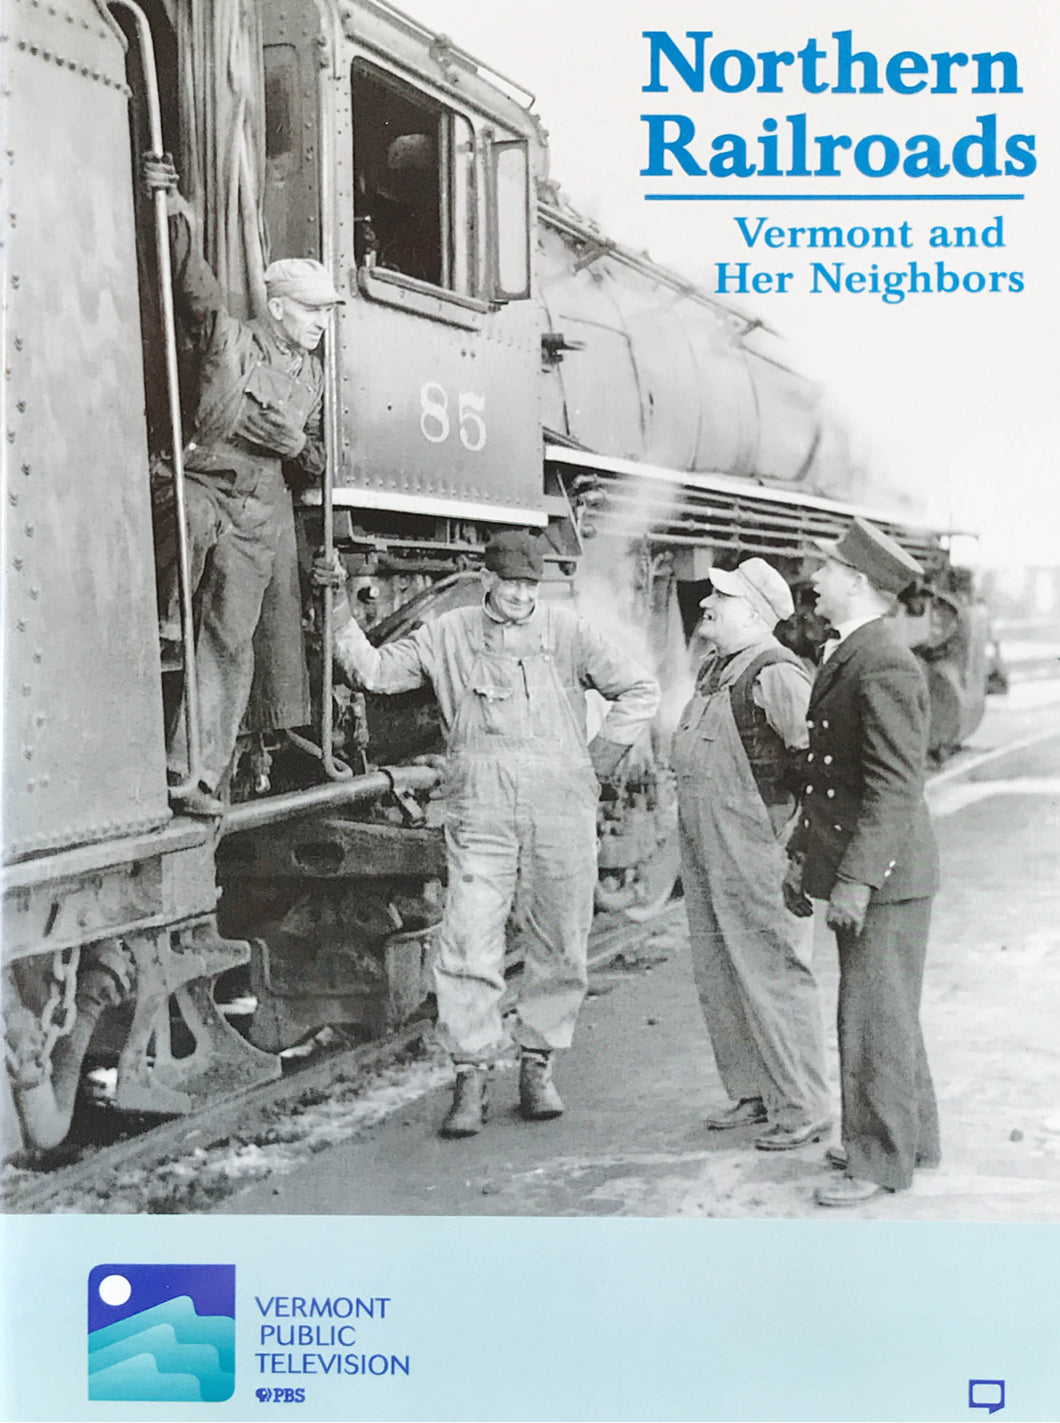 Northern Railroads: Vermont and Her Neighbors